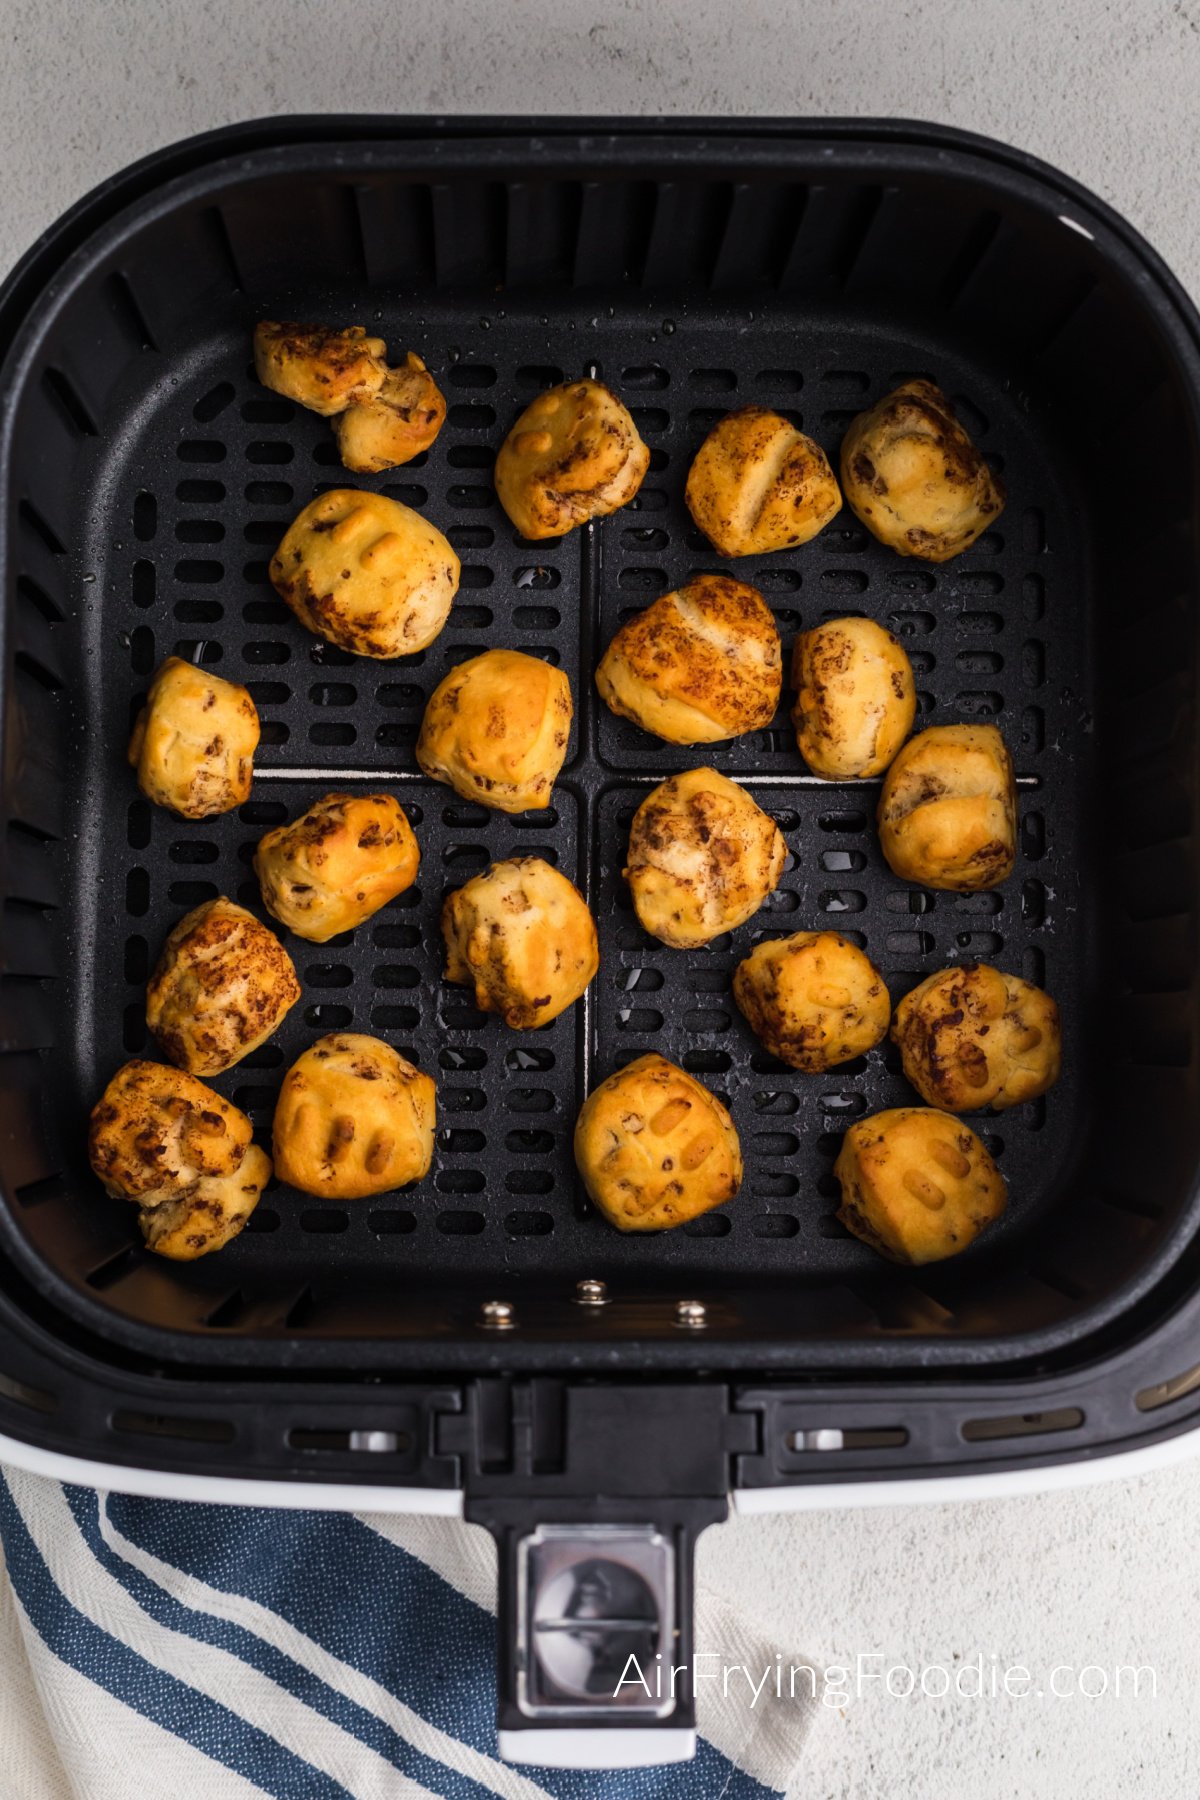 Cinnamon roll balls air fried to a golden brown in the basket of the air fryer.